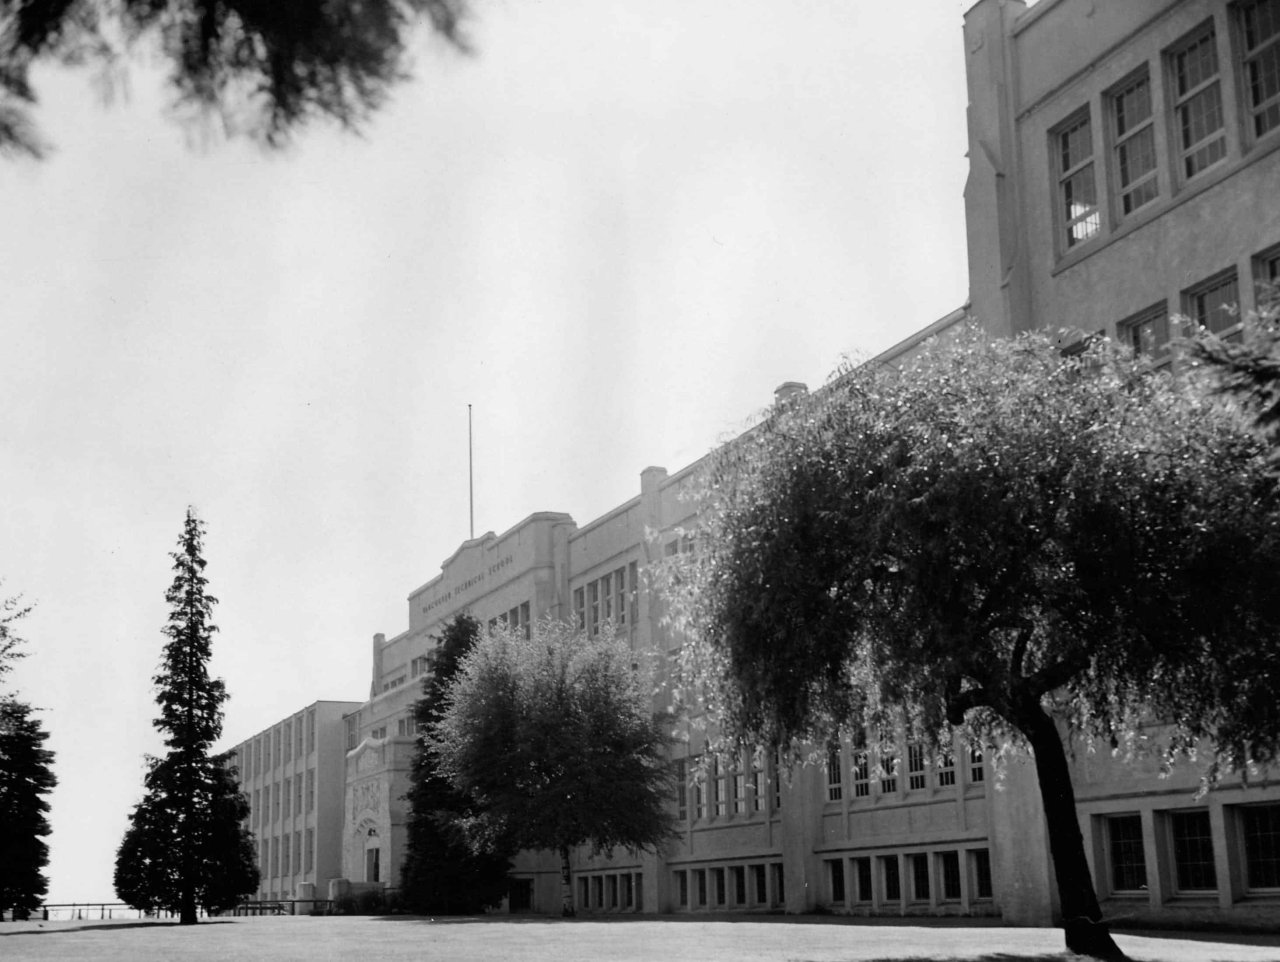 Vancouver Technical School. Source: Vancouver School Board Archives